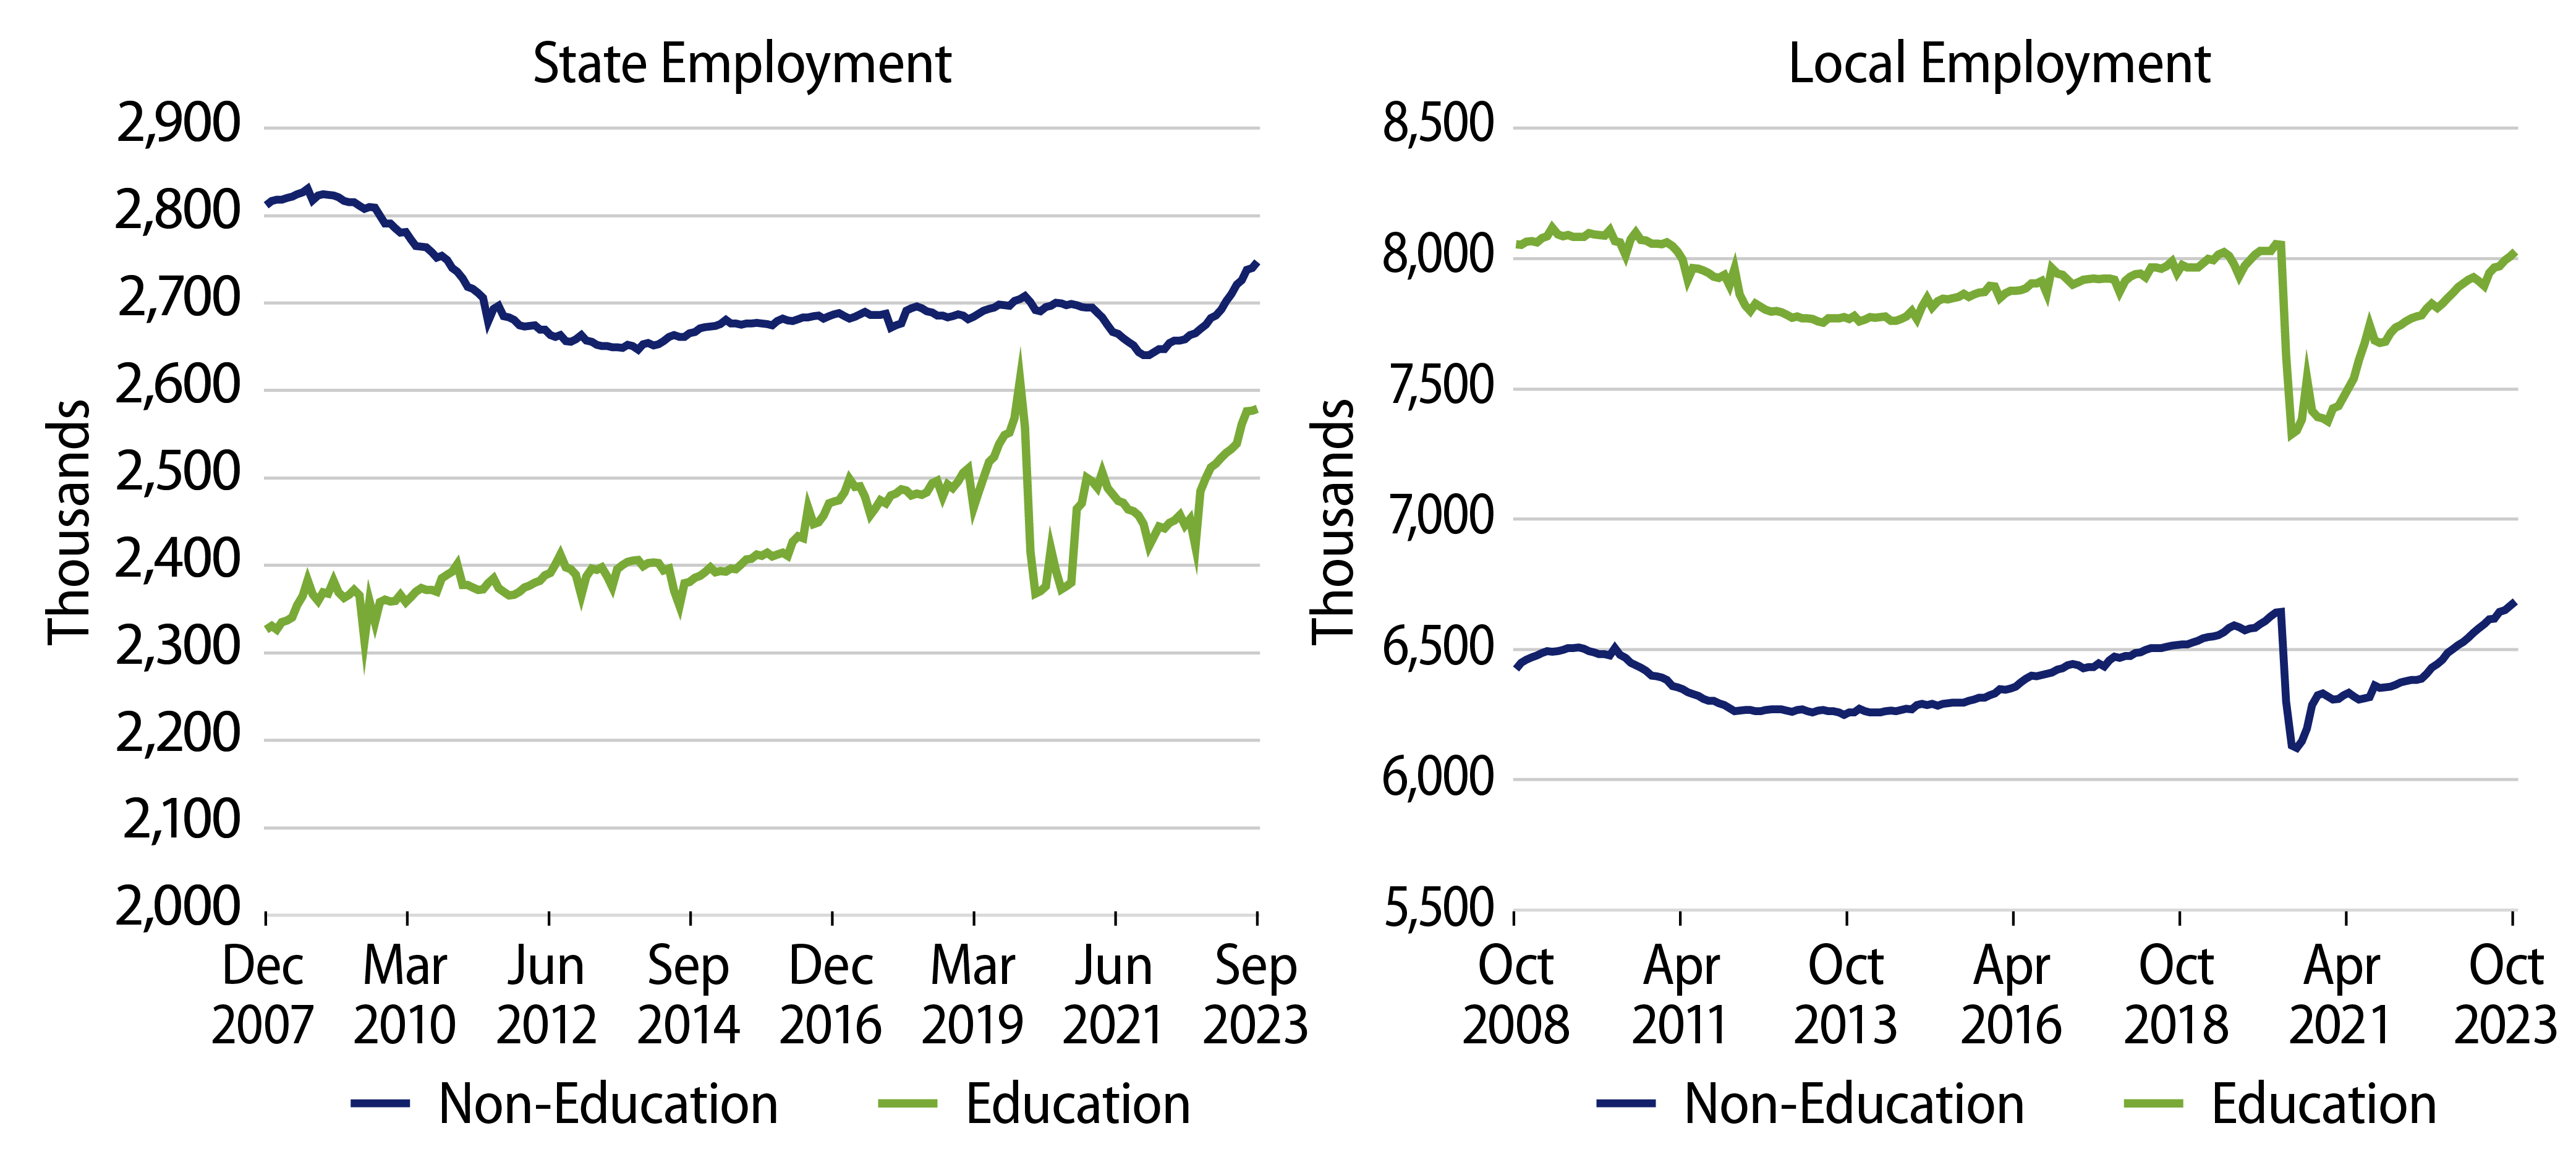 State and Local Employment Levels